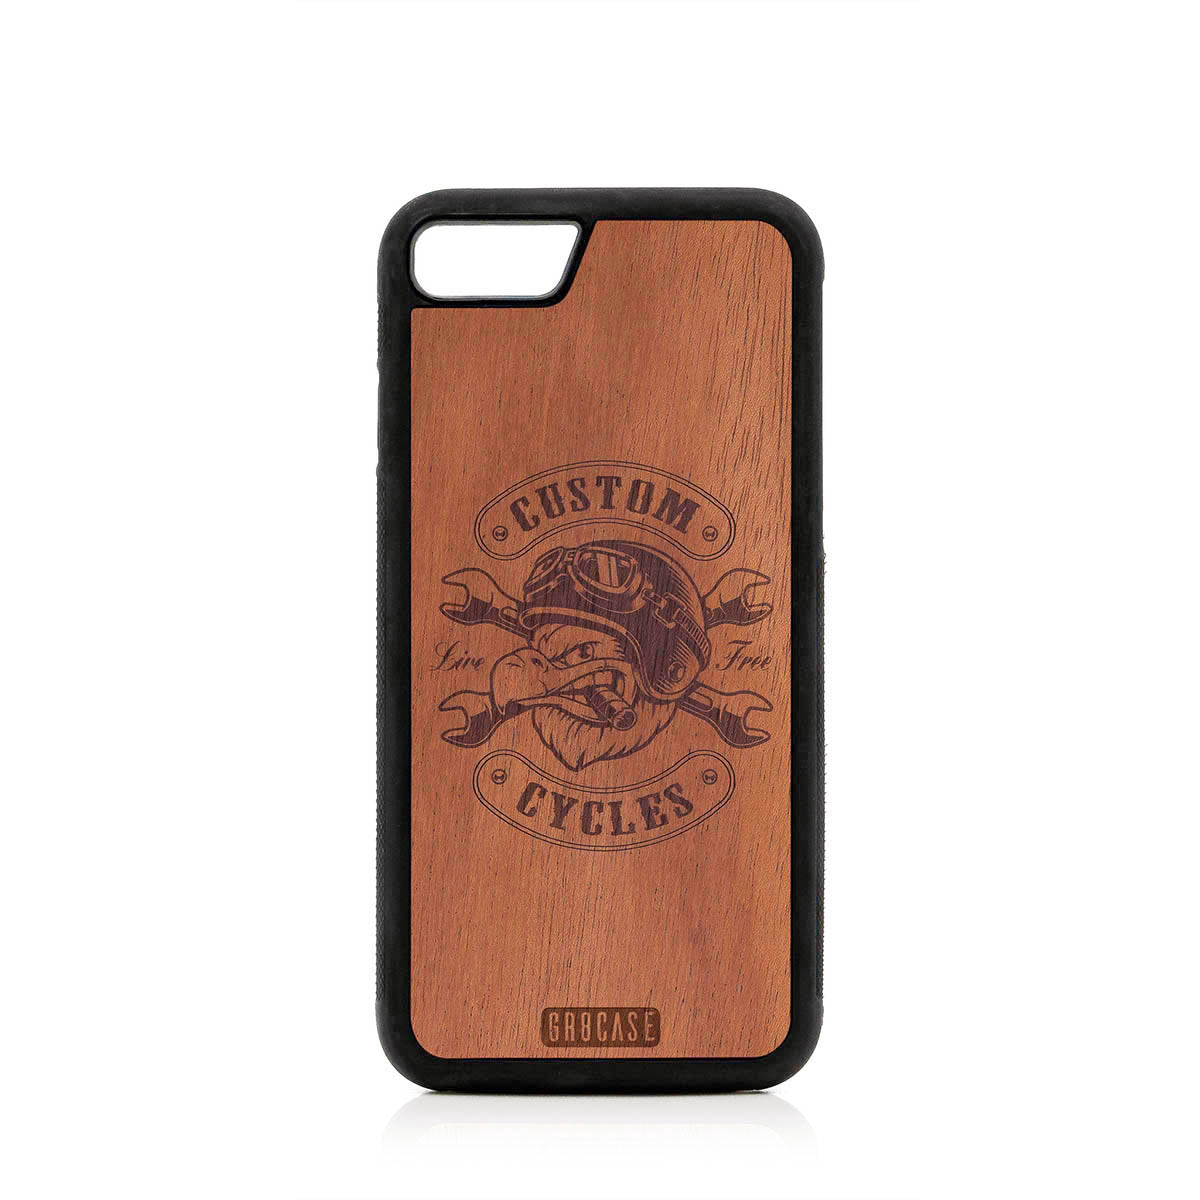 Custom Cycles Live Free (Biker Eagle) Design Wood Case For iPhone 7/8 by GR8CASE